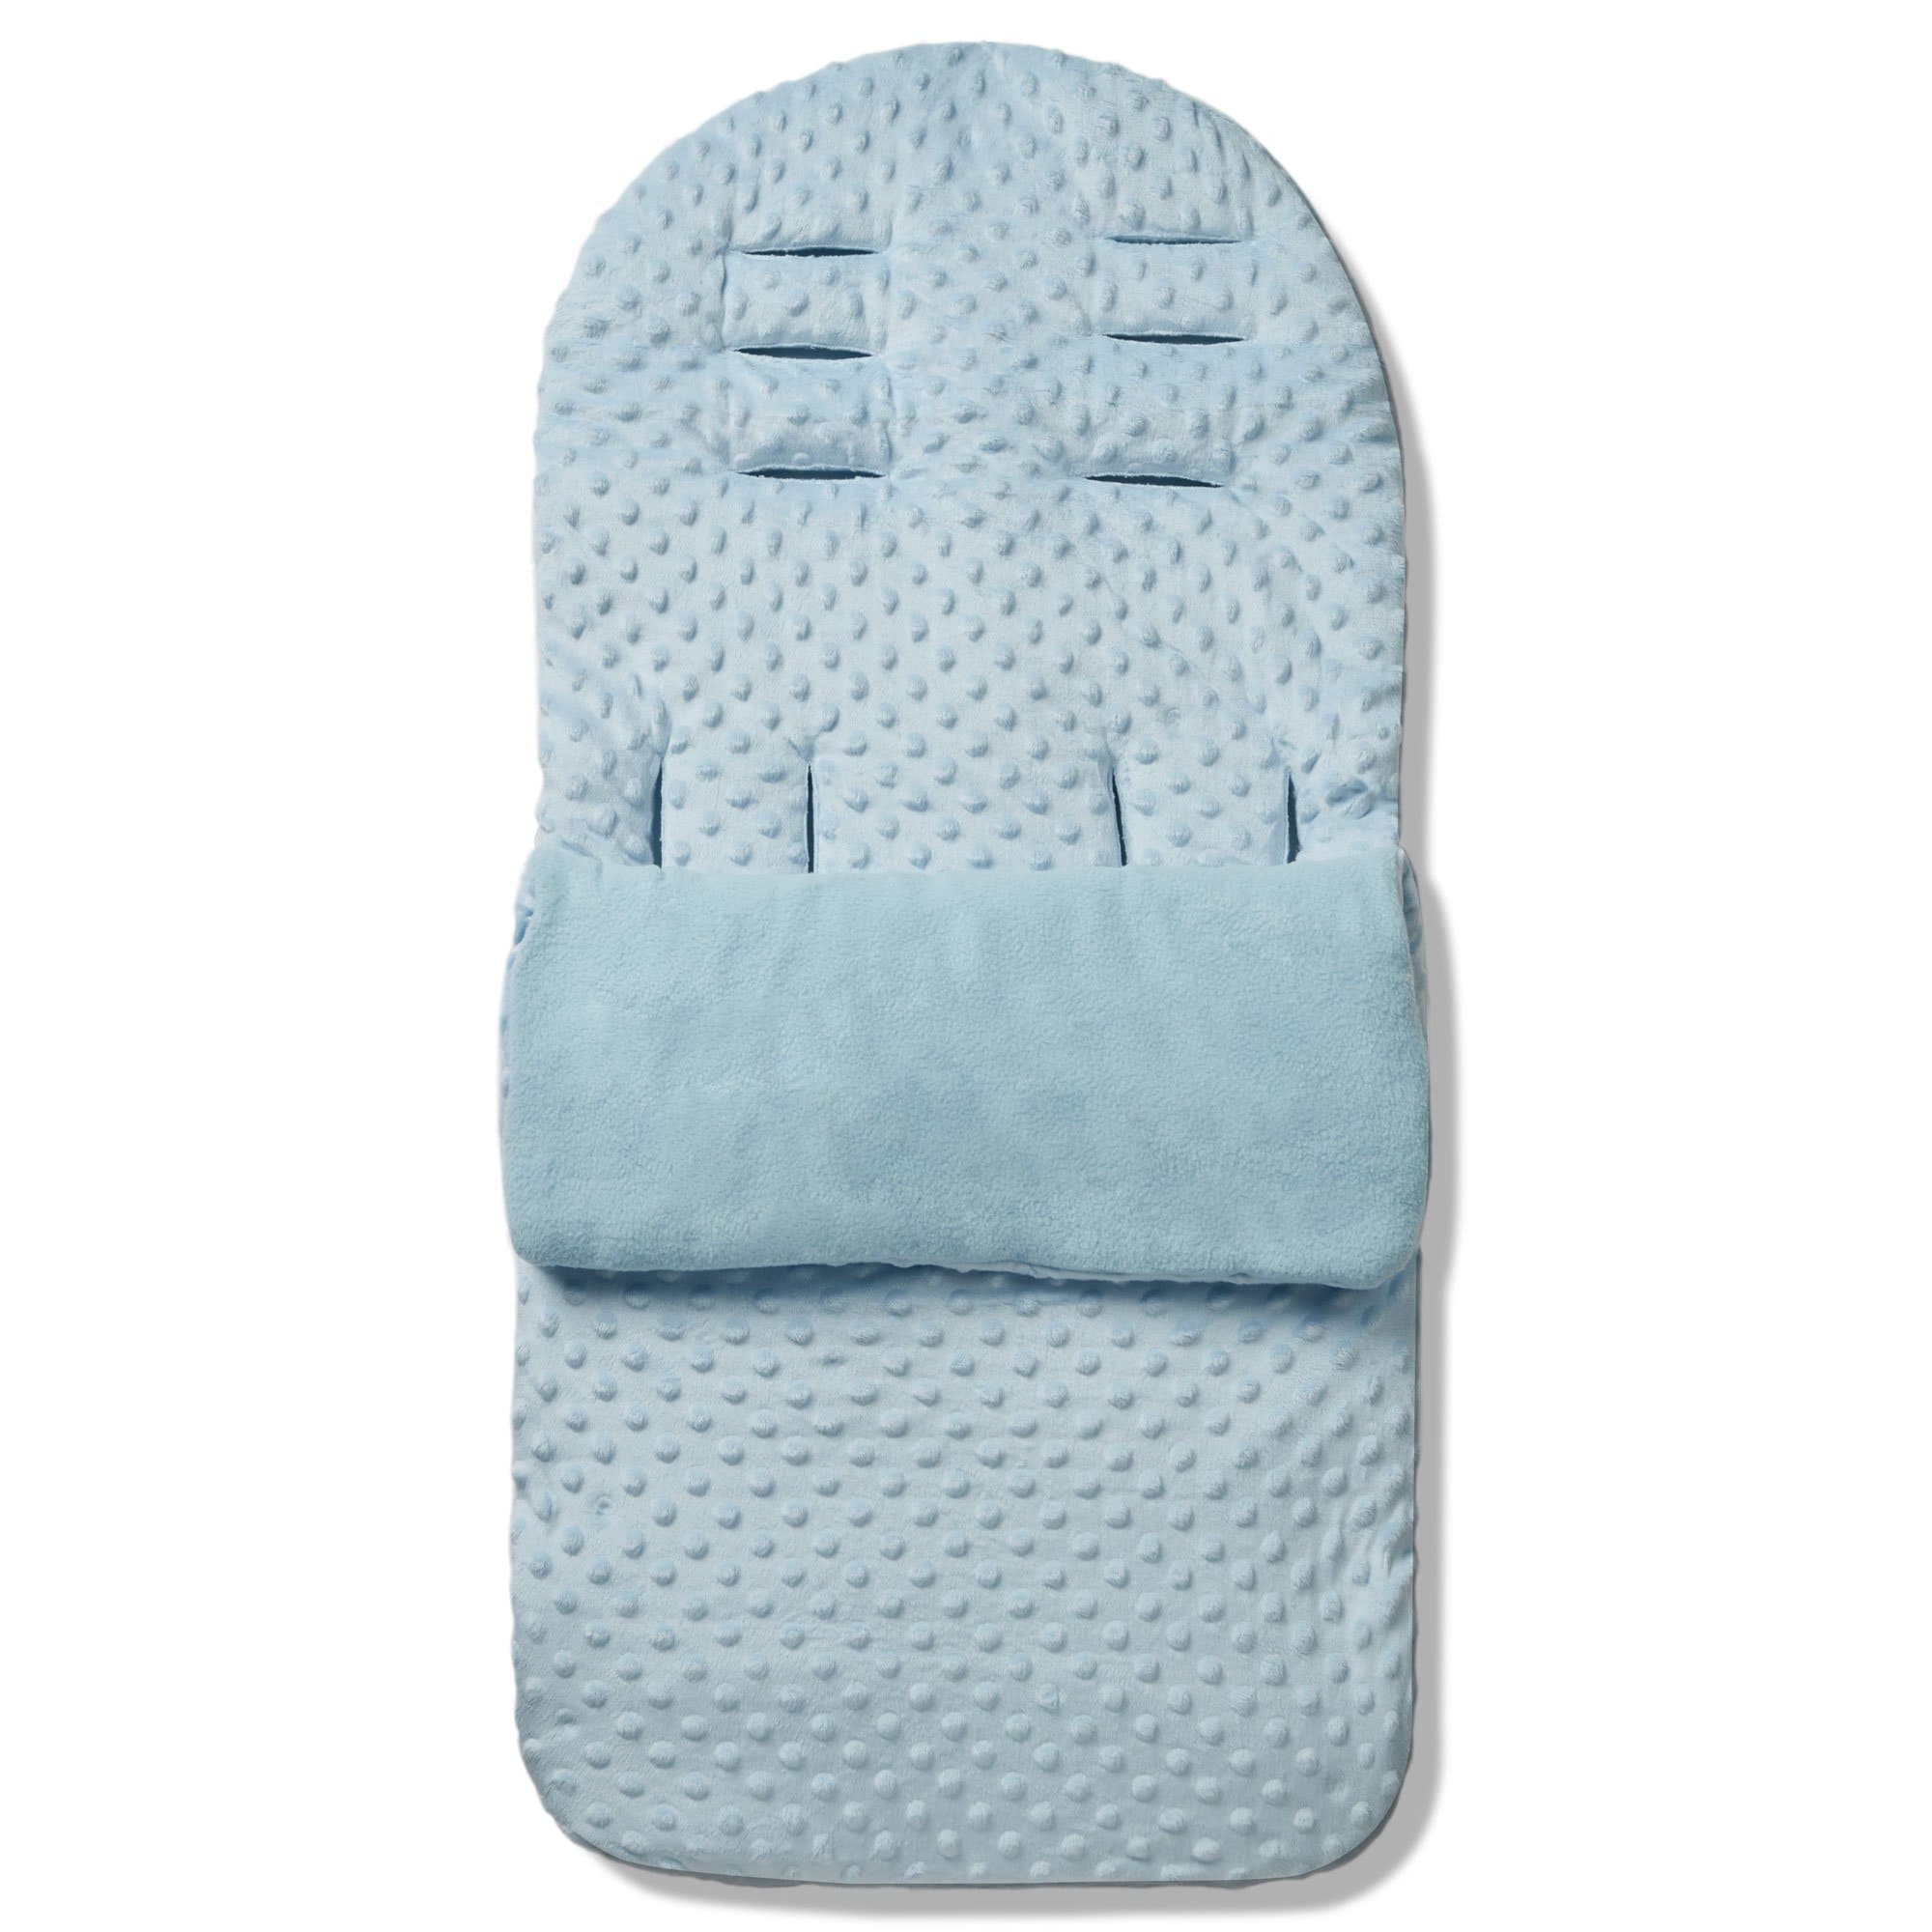 Dimple Footmuff / Cosy Toes Compatible with Brio - Blue / Fits All Models | For Your Little One